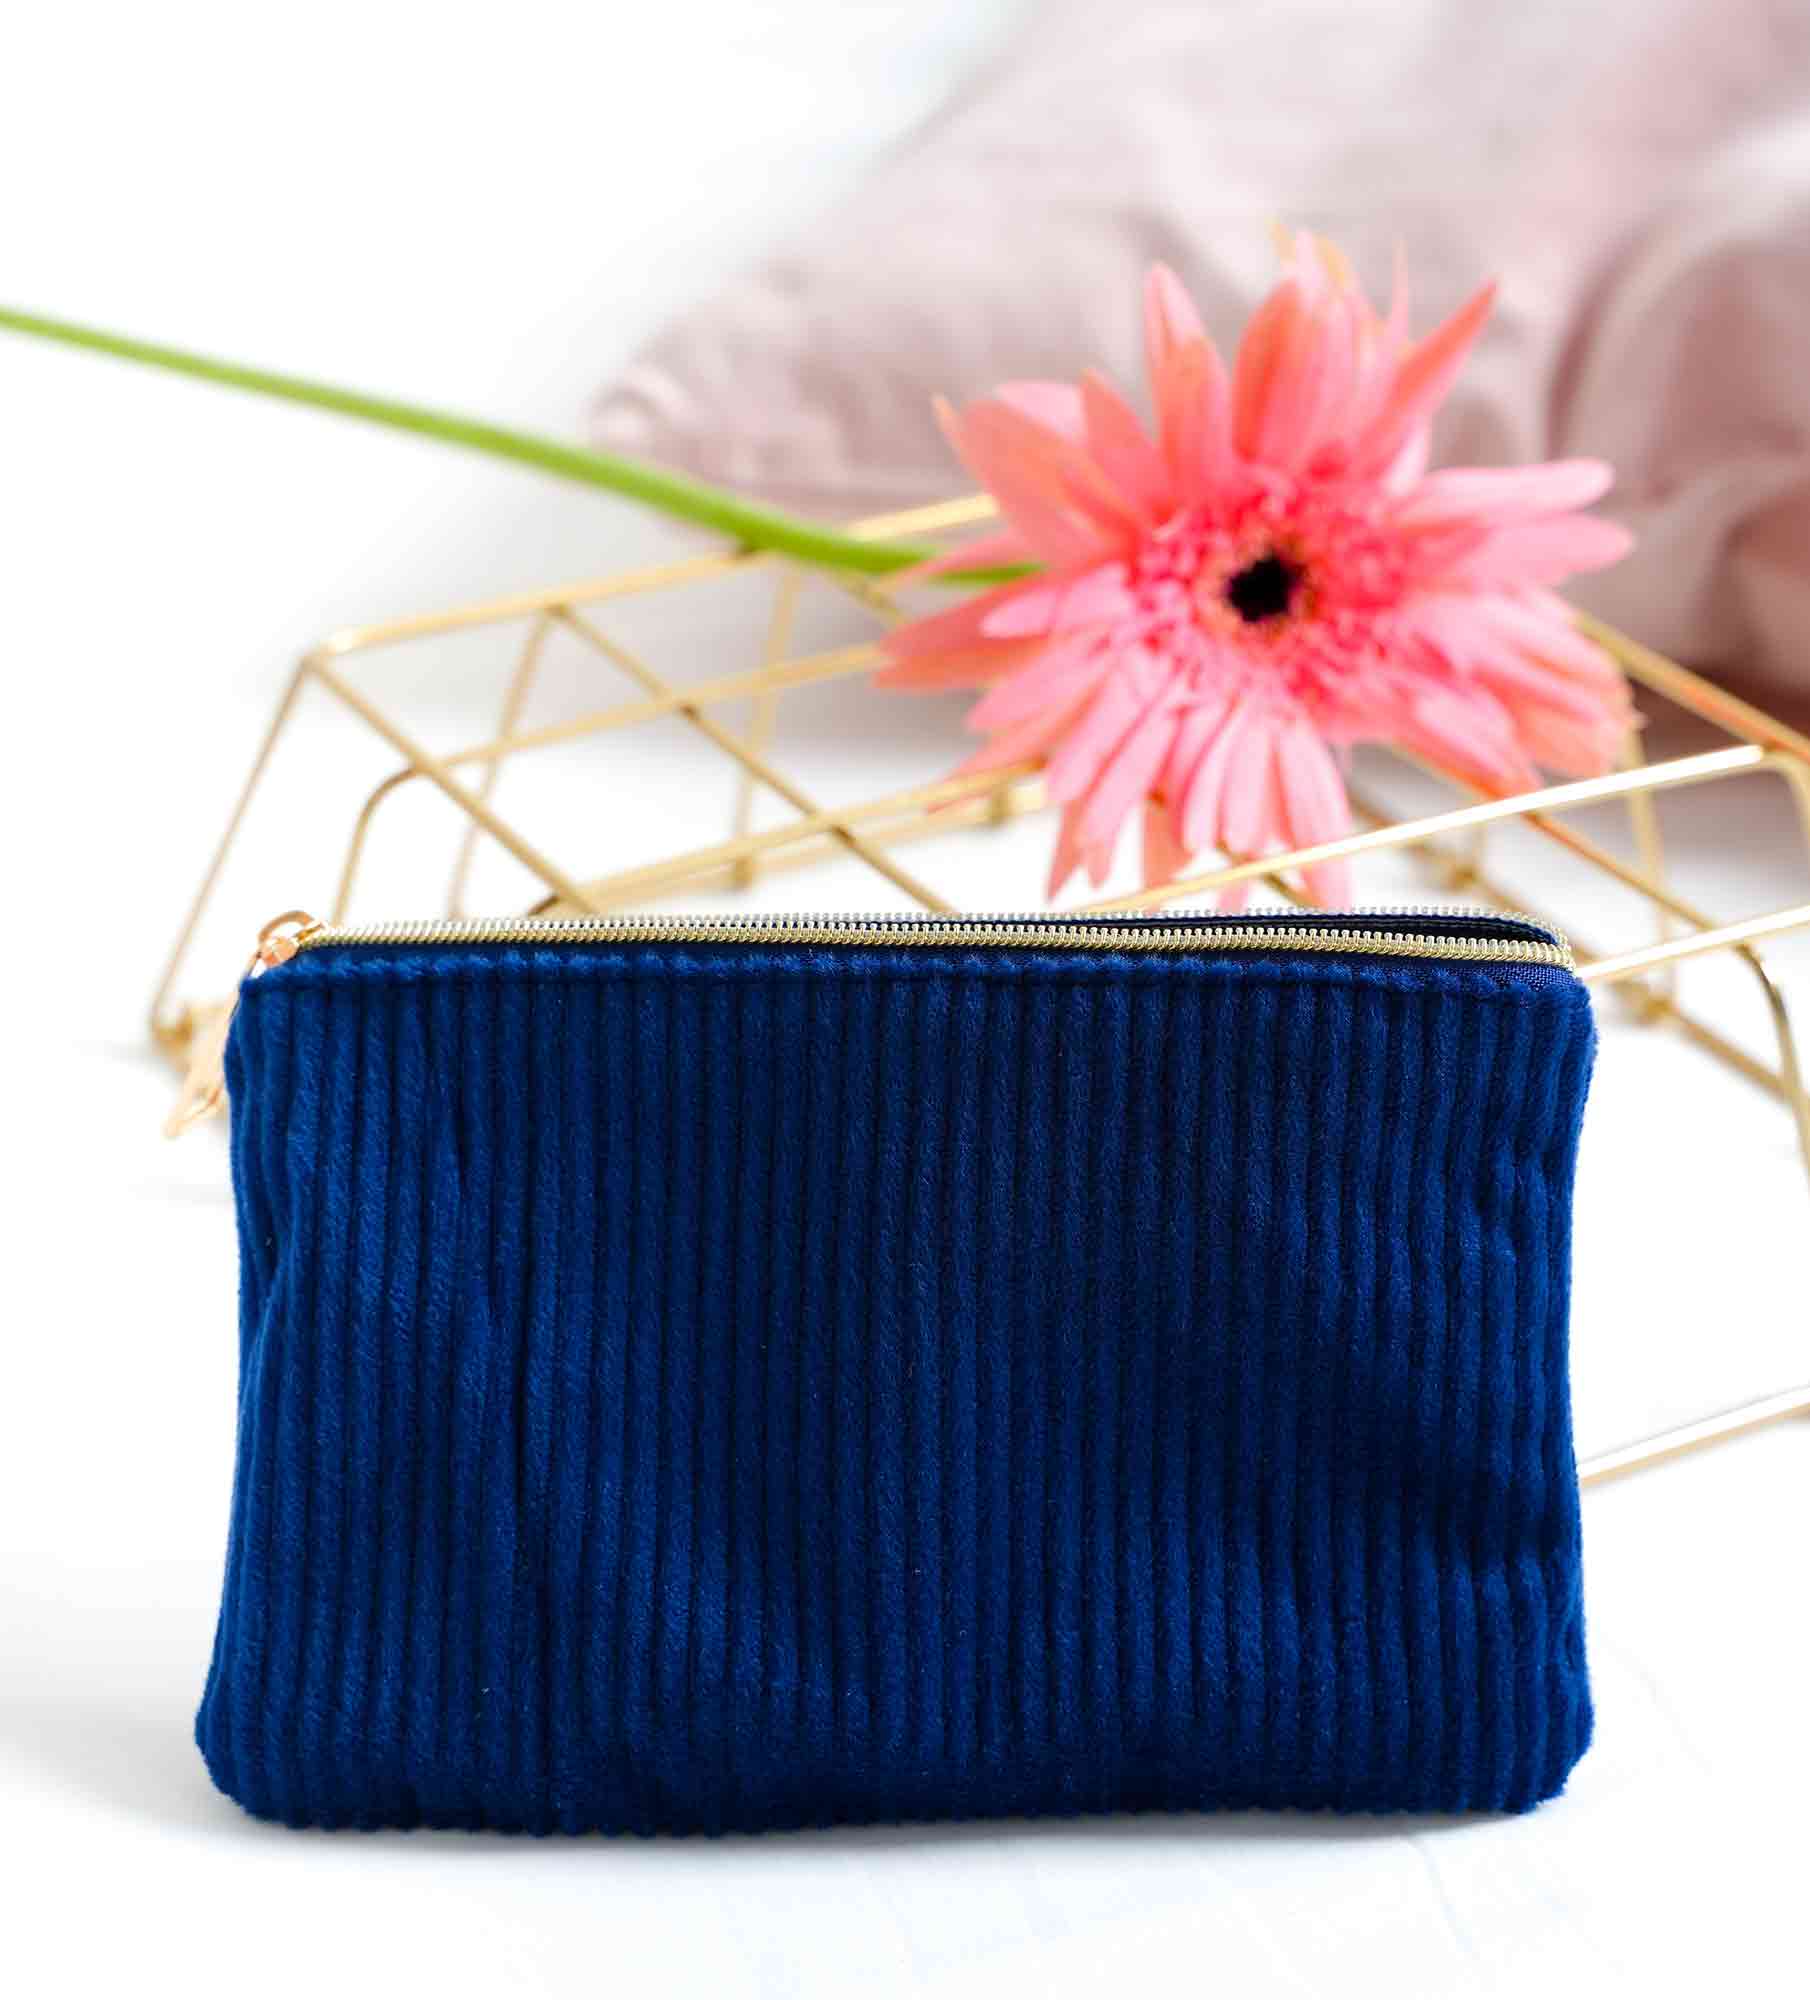 Culottée Carry Me Blue | Available at The Green Collective